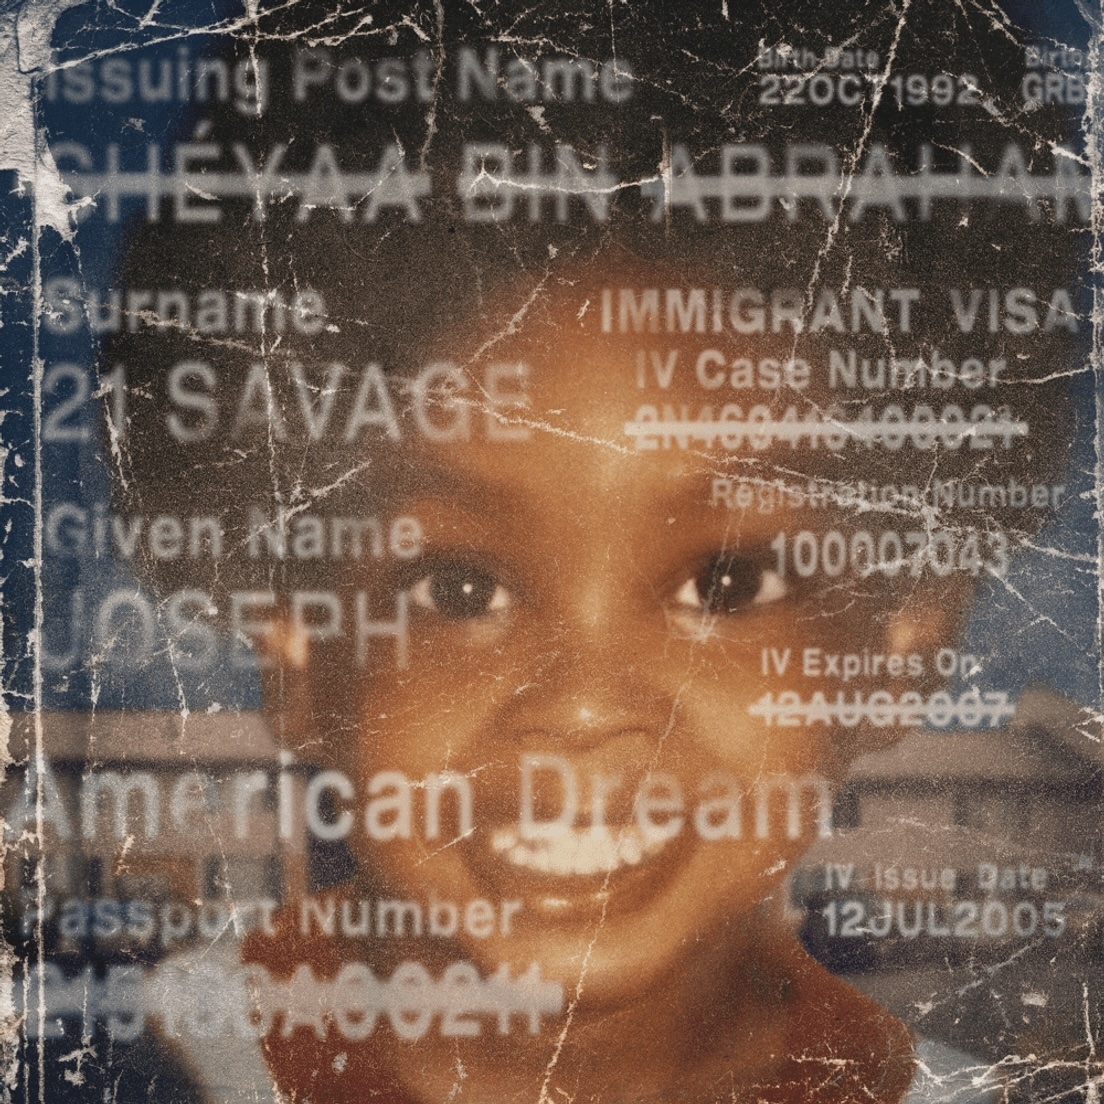 Young 21 Savage smiling with text over the image mentioning &quot;IMMIGRANT VISA,&quot; &quot;American Dream,&quot; and &quot;JOSEPH,&quot; reflecting themes of immigration and identity